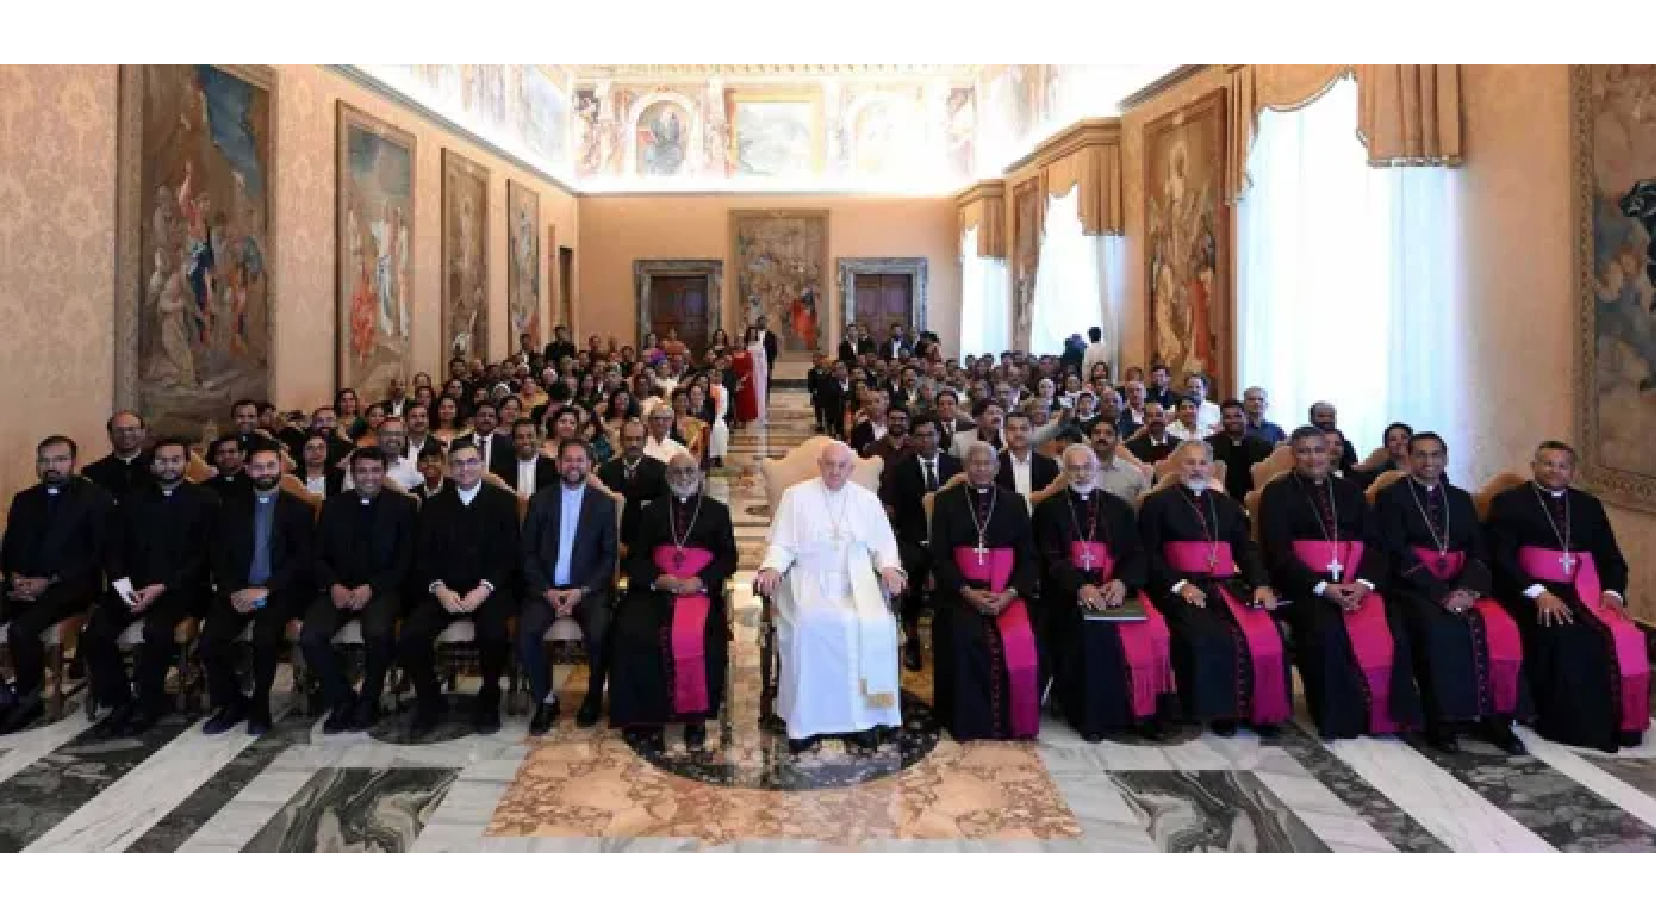 Meeting of Bishops of the Syro-Malabar Catholic Church with Pope Francis